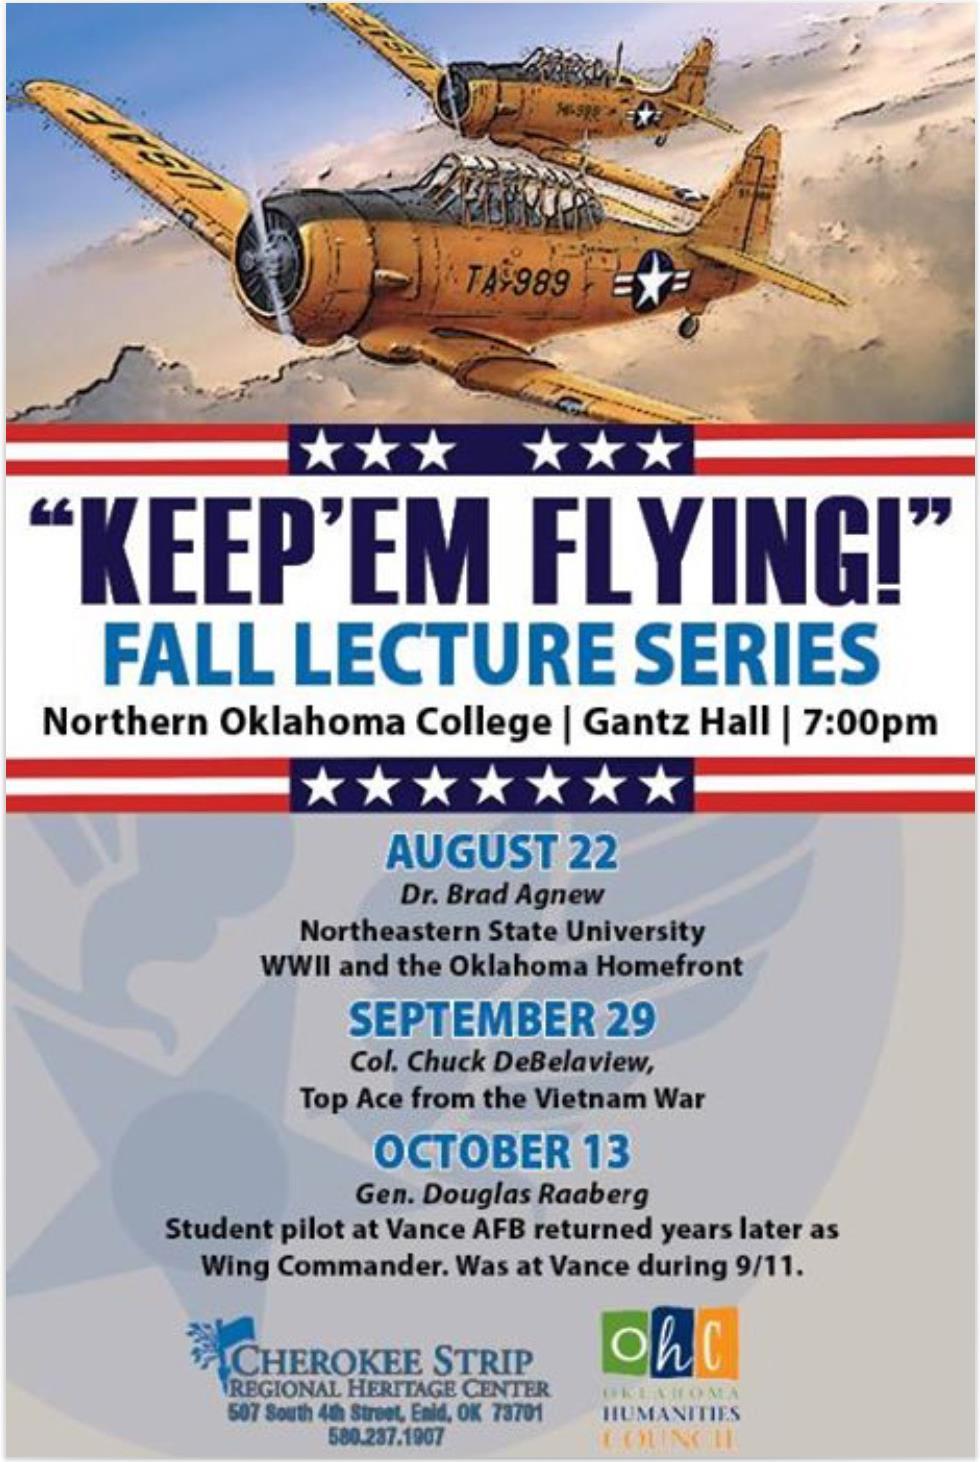 Fall lecture series, Keep Em Flying!